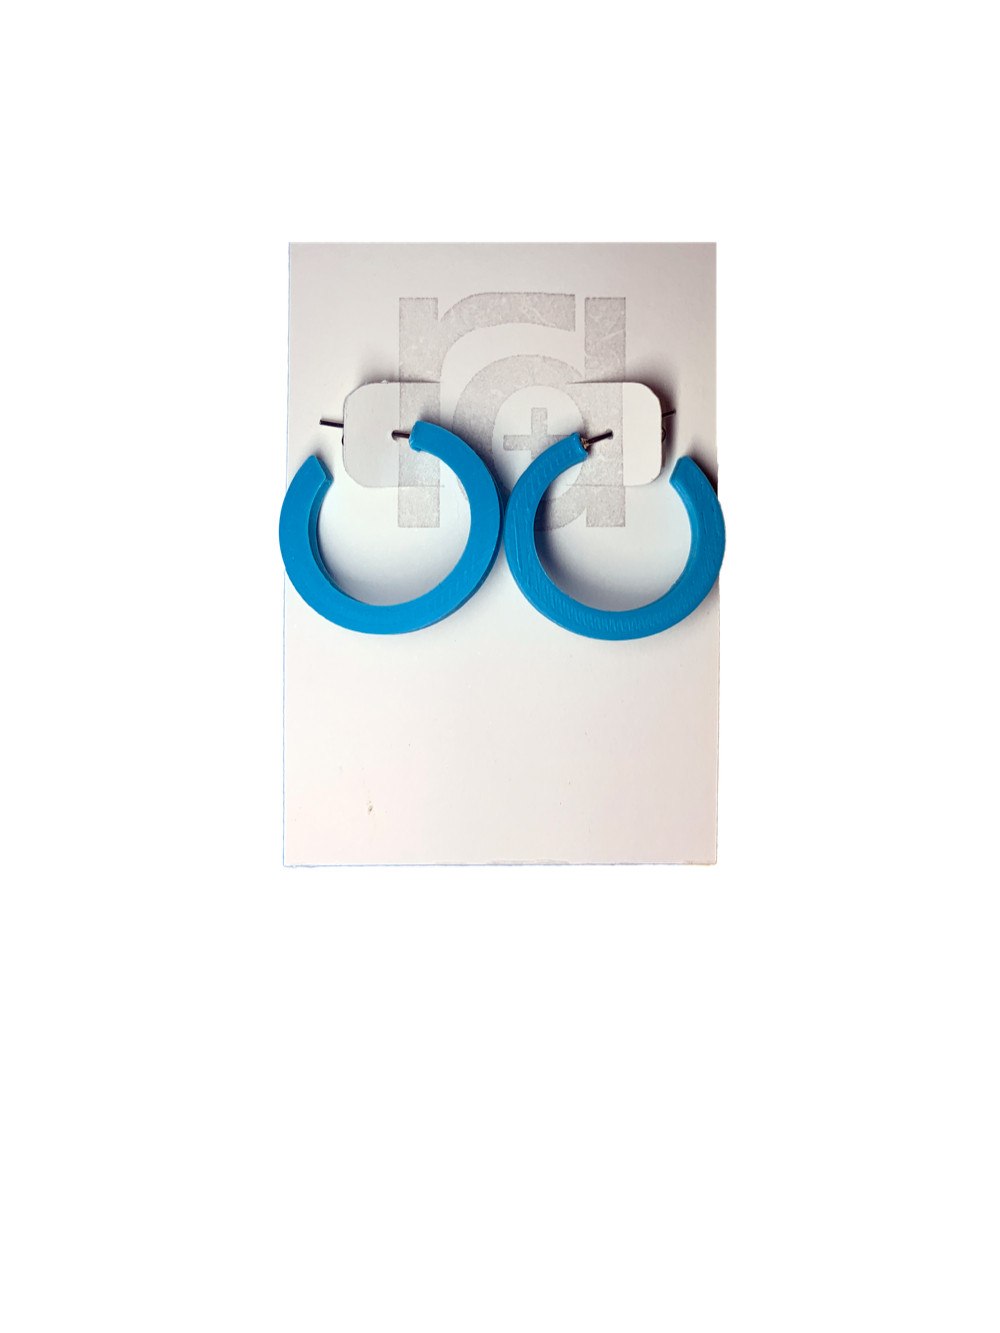 On a white R+D earring card are two chunky hoops. They are printed in an eco friendly teal color.